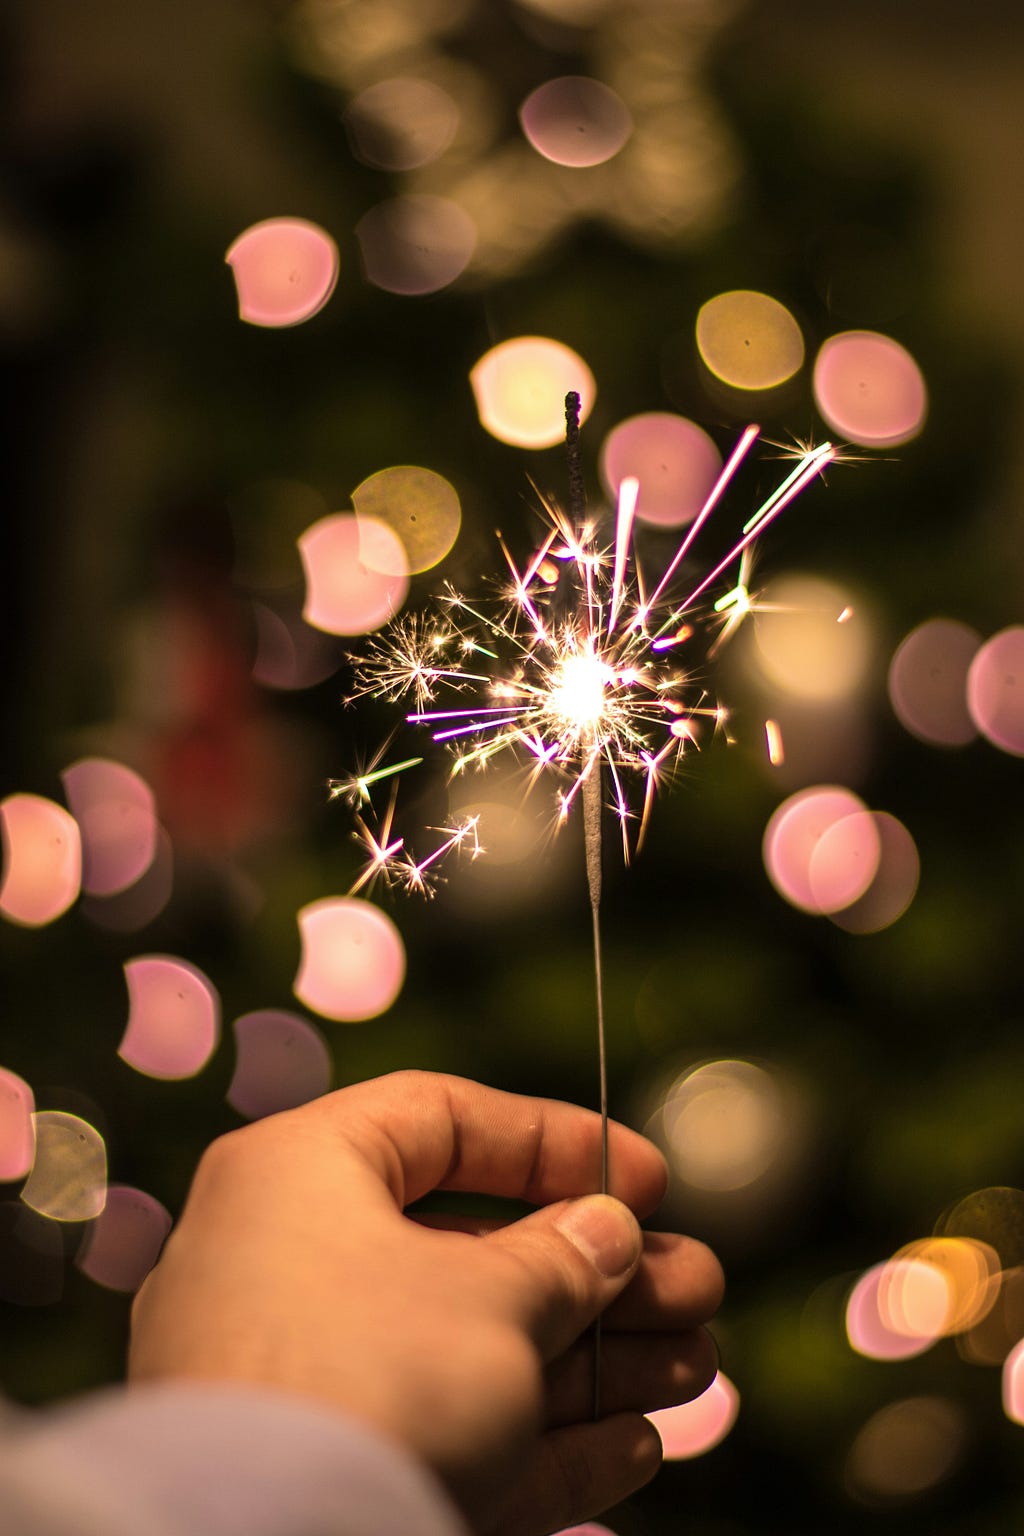 A hand holding out a single lit sparkler. Author used this image to connect to her celebration of one year on Medium.